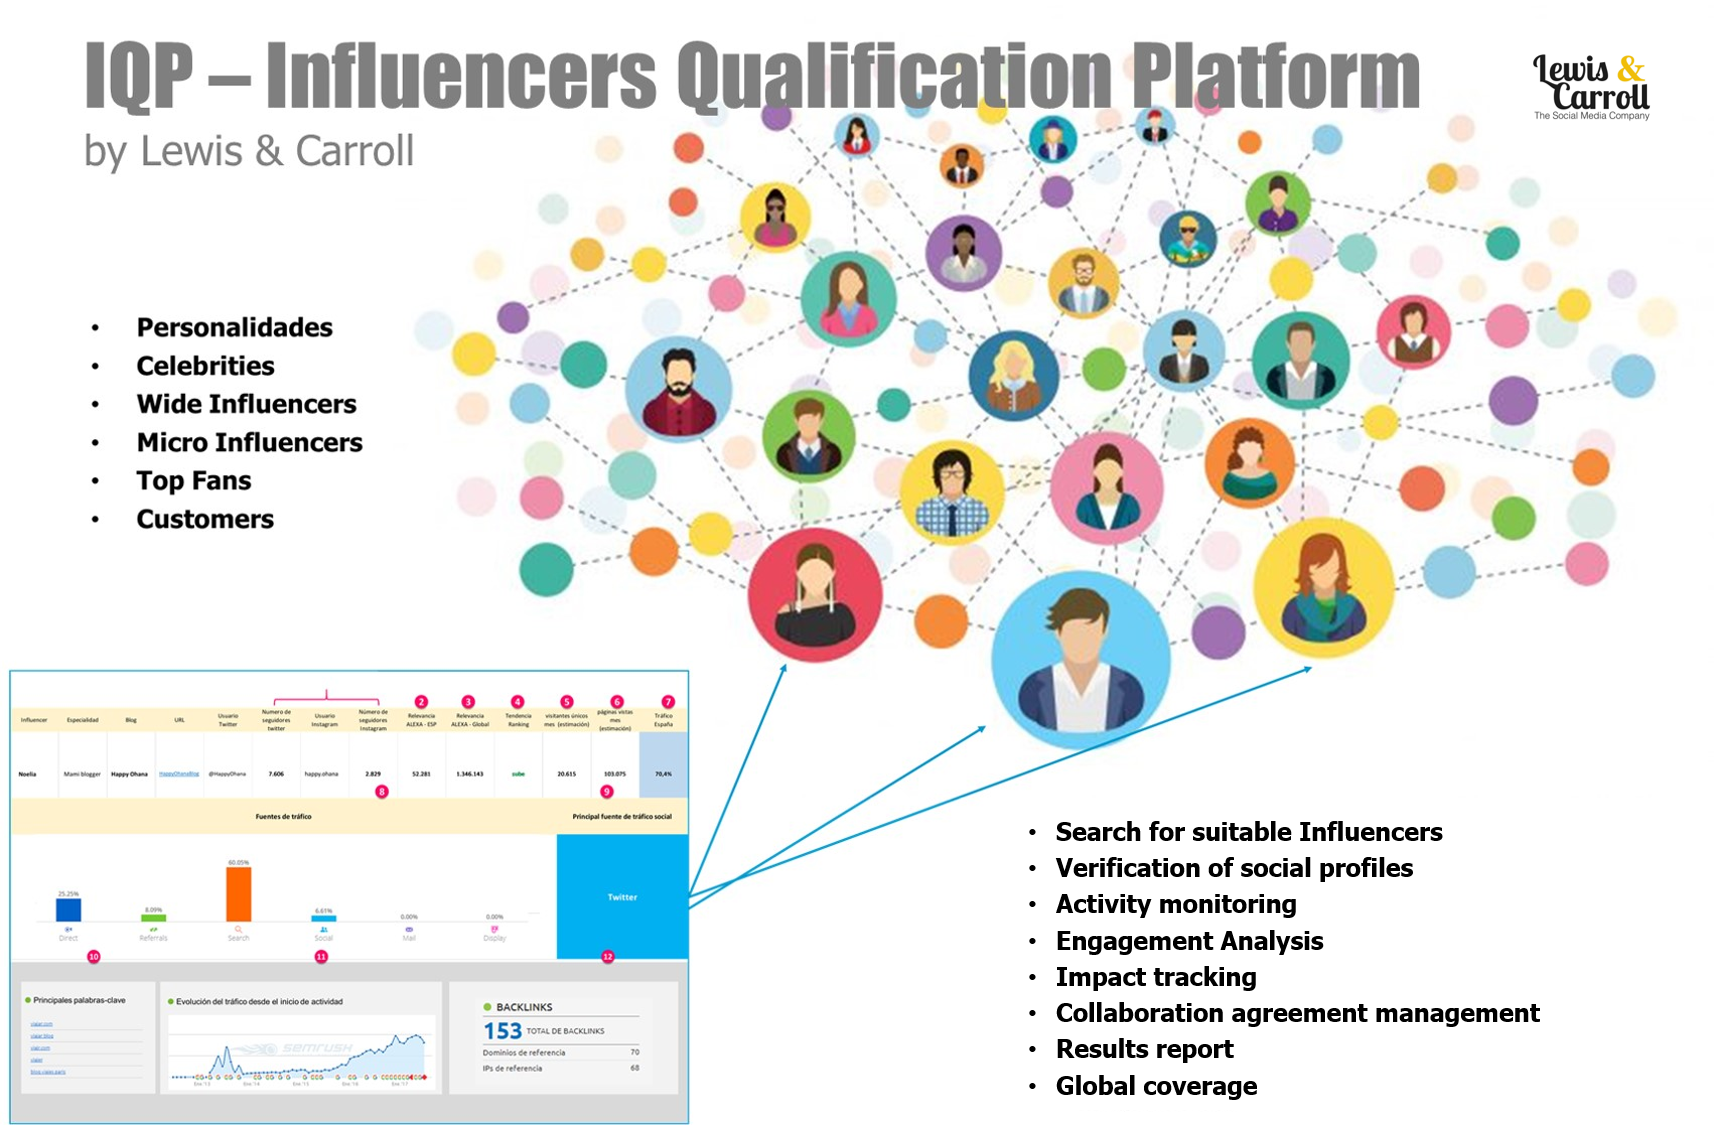 Influencers Qualification Platform - Influencers Marketing by Lewis & Carroll